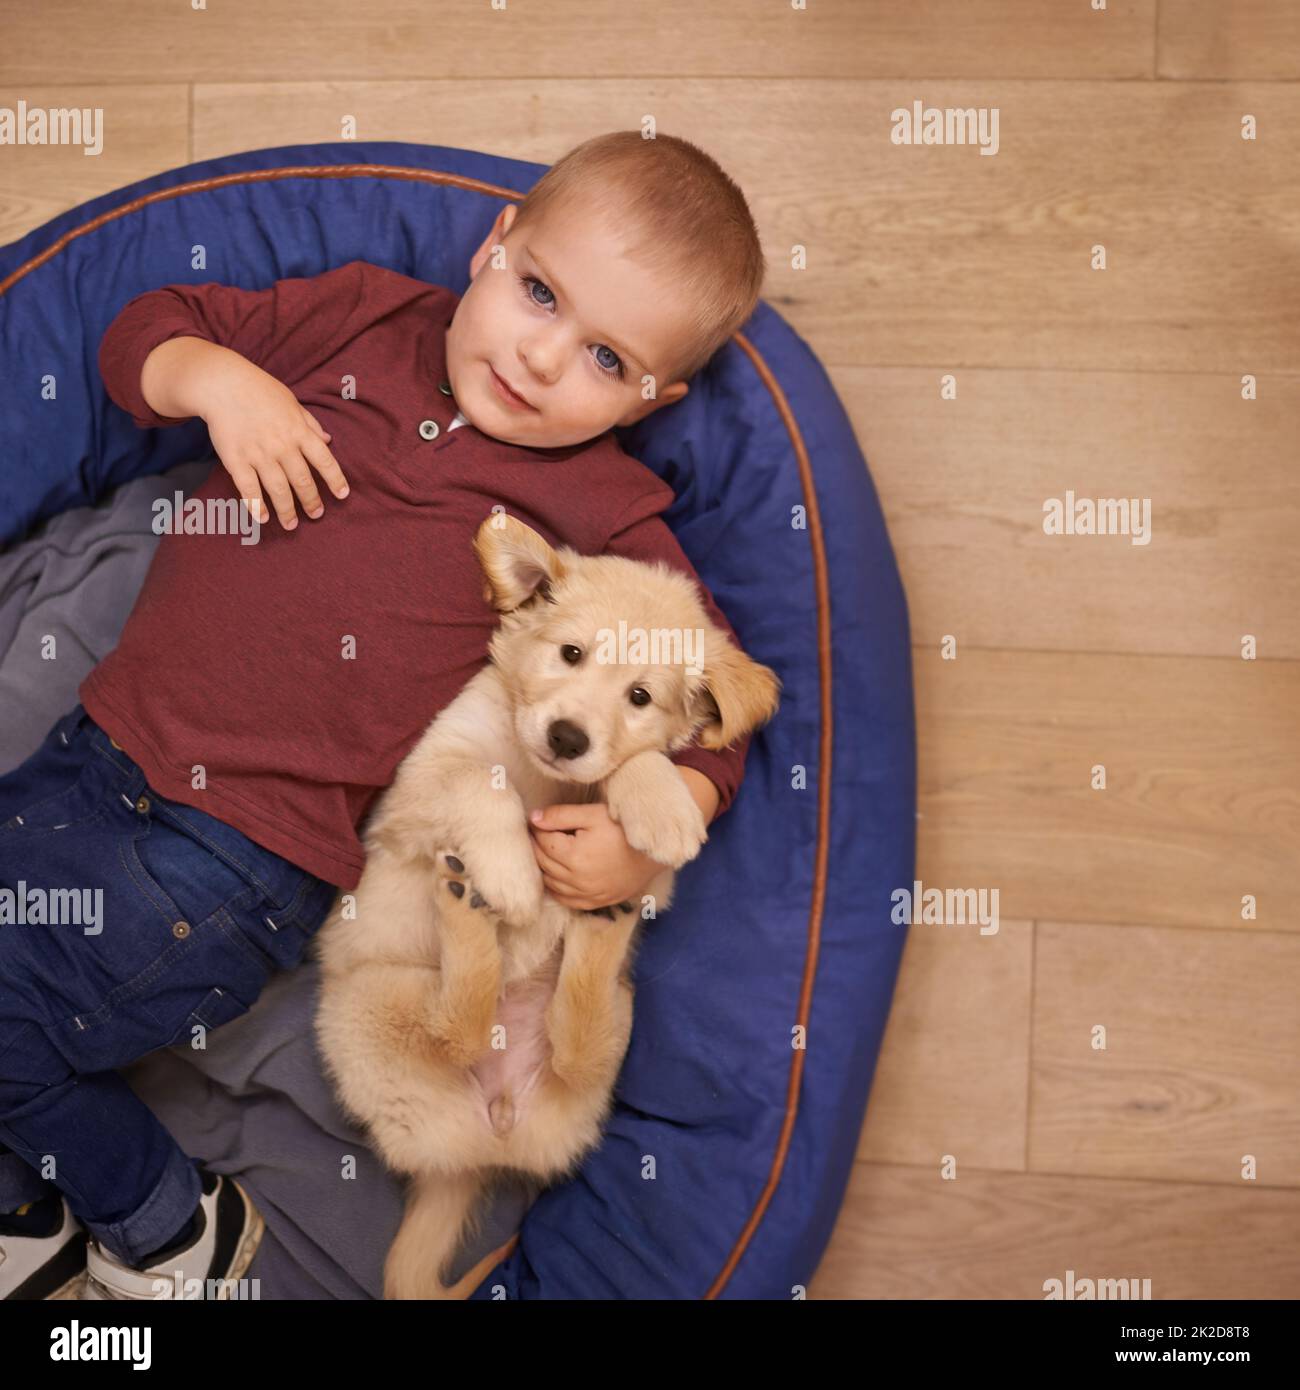 The best friend you can get. An adorable little boy with his puppy at home. Stock Photo